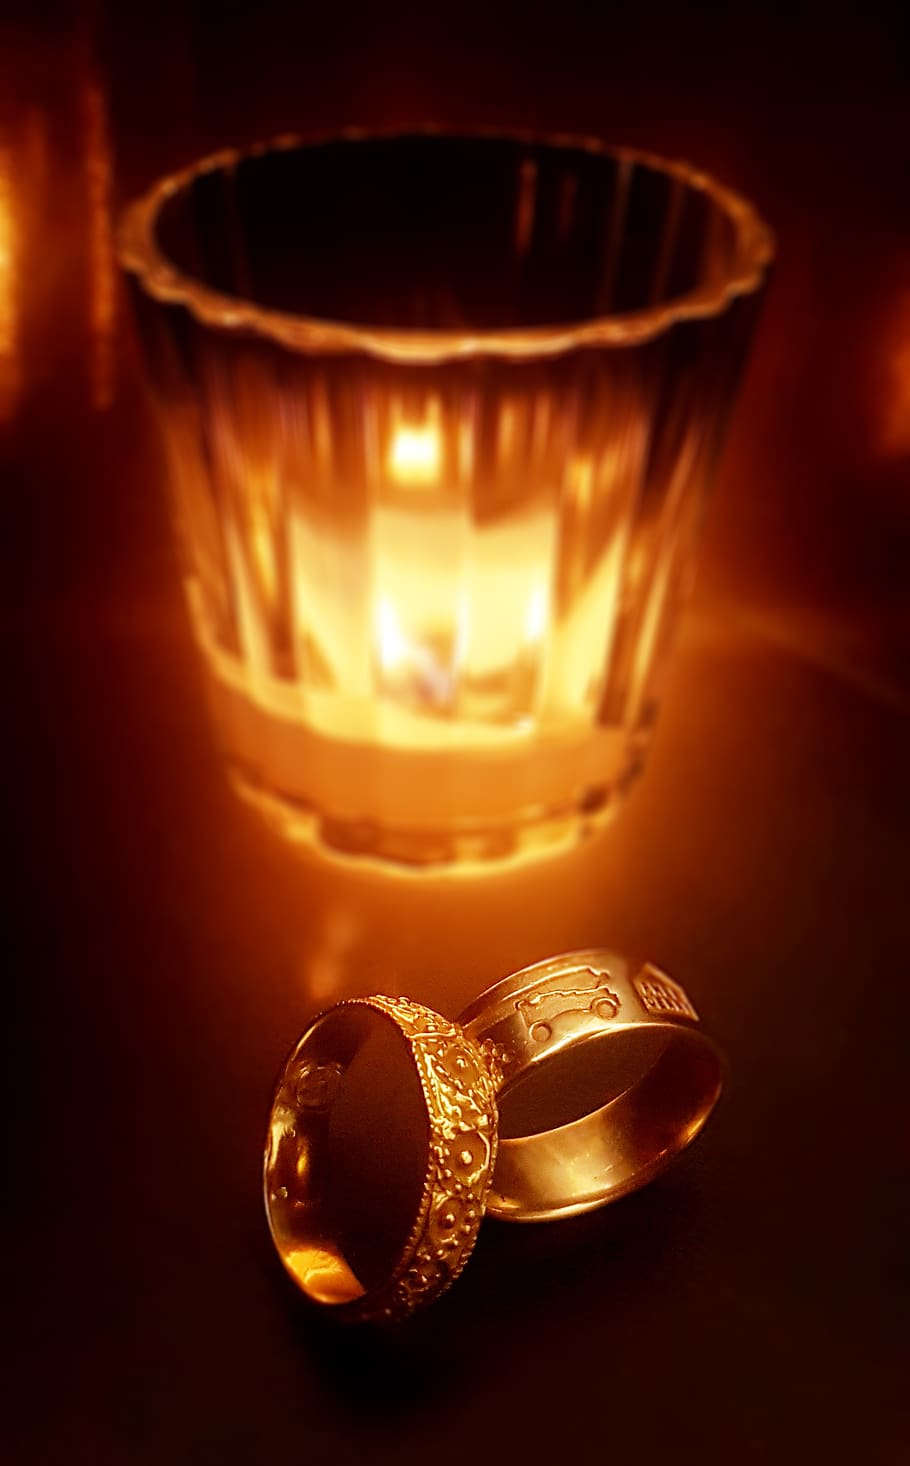 wedding, rings, fire, candle, close-up, food and drink, illuminated, indoors, focus on foreground, glass